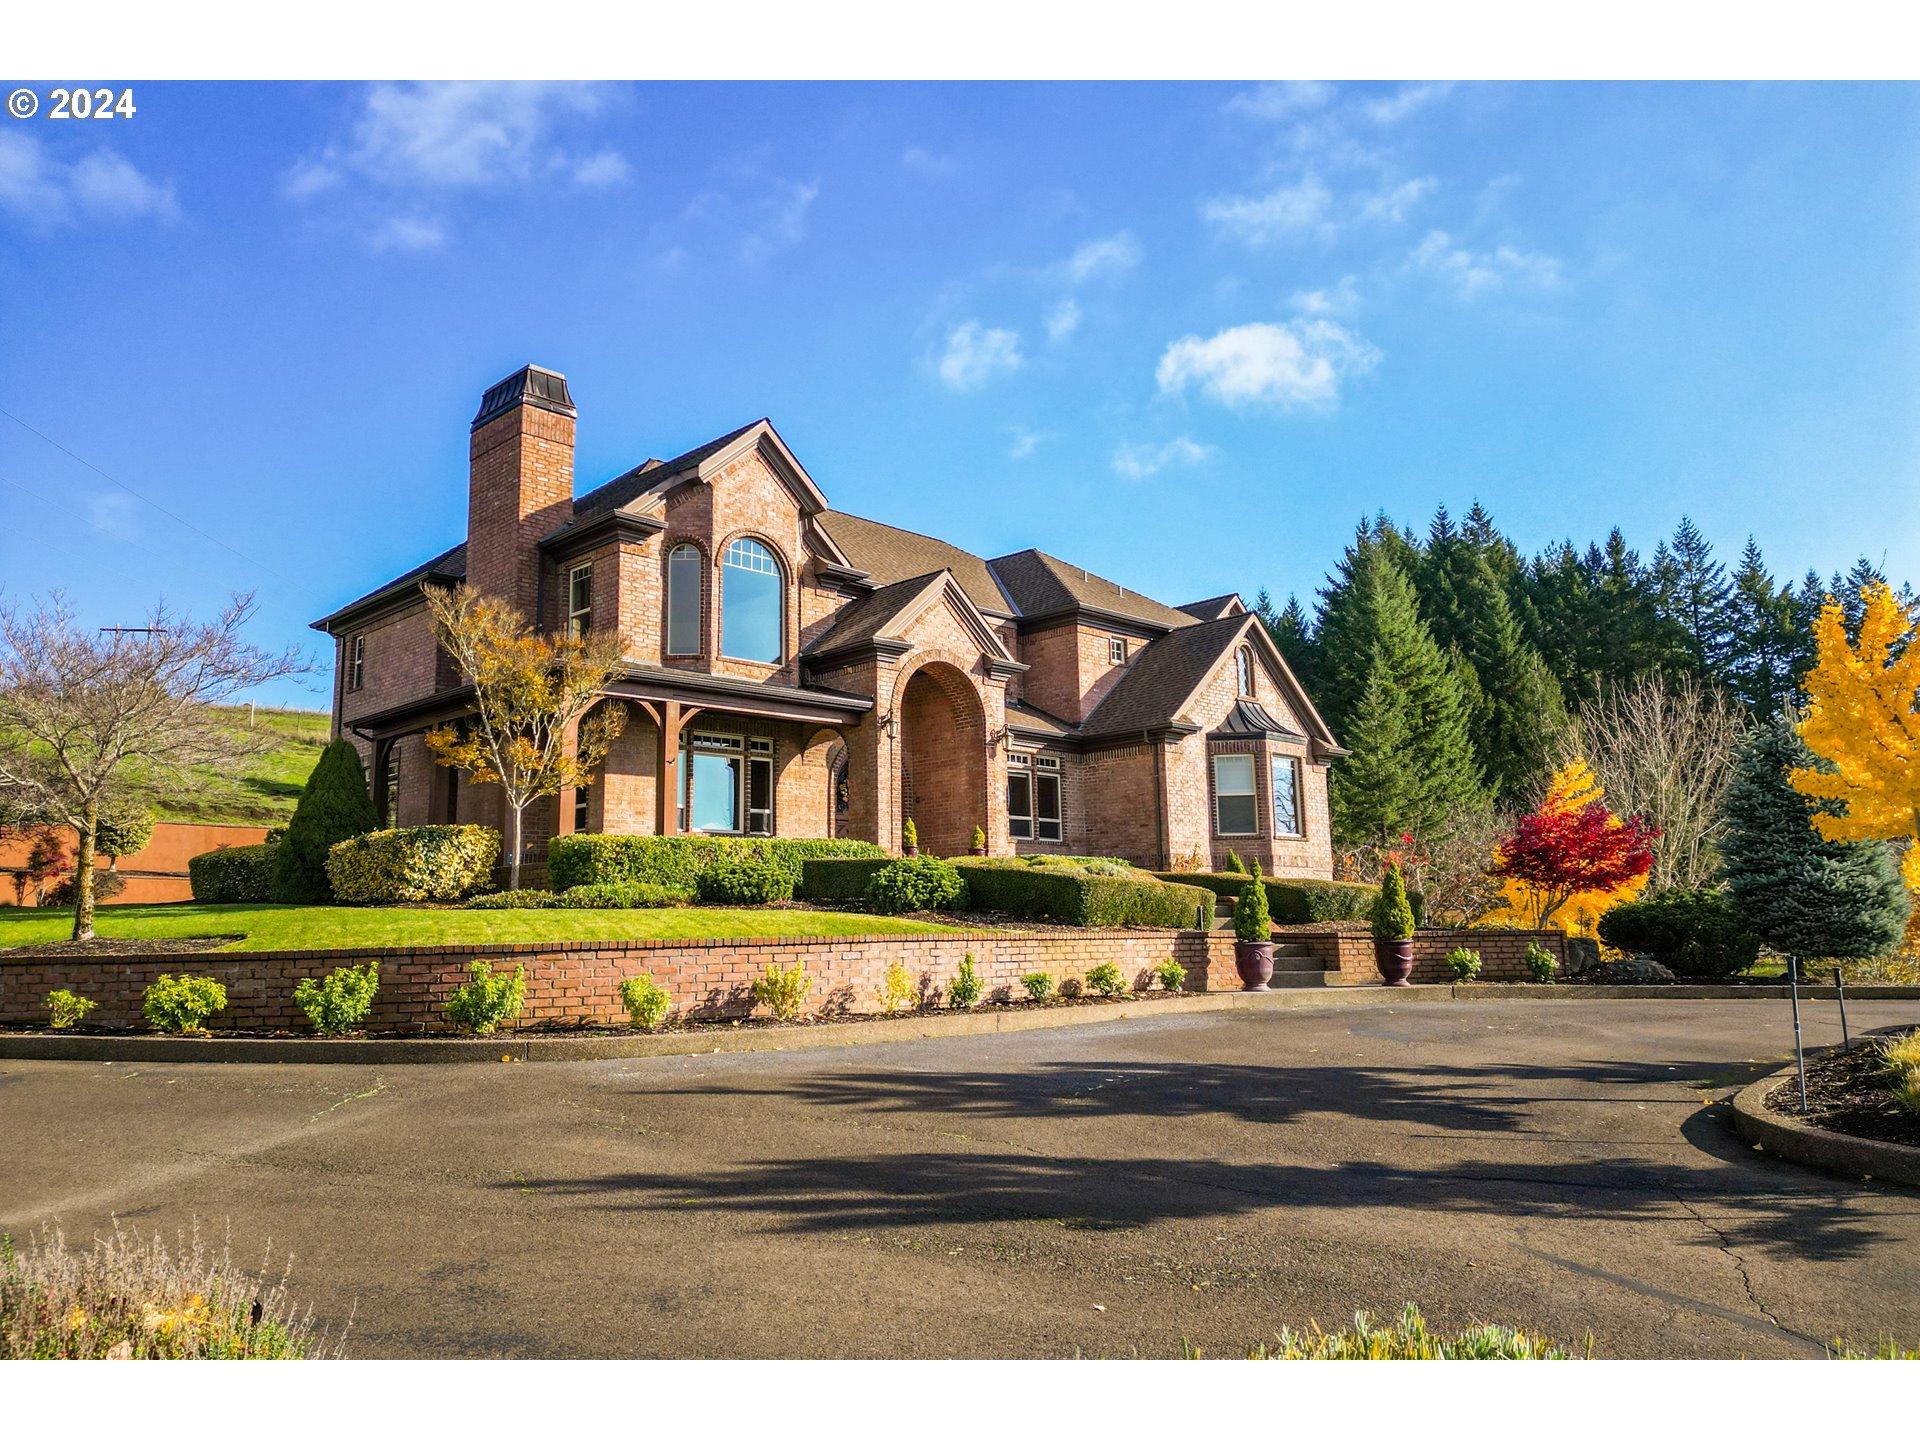 3485 NW DIMPLE HILL RD, Corvallis, OR 